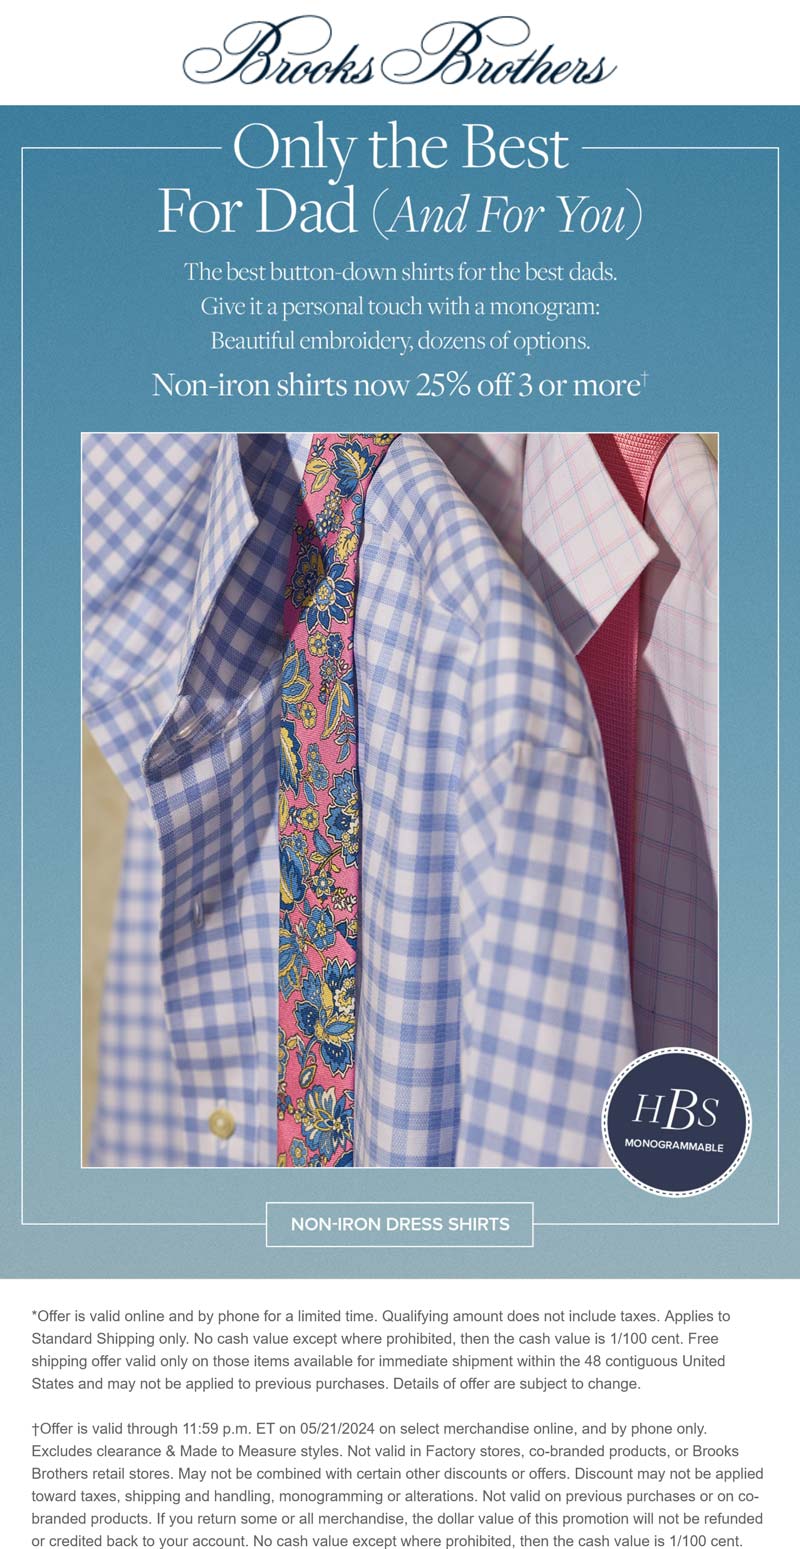 Brooks Brothers stores Coupon  25% off 3+ non-iron shirts at Brooks Brothers #brooksbrothers 